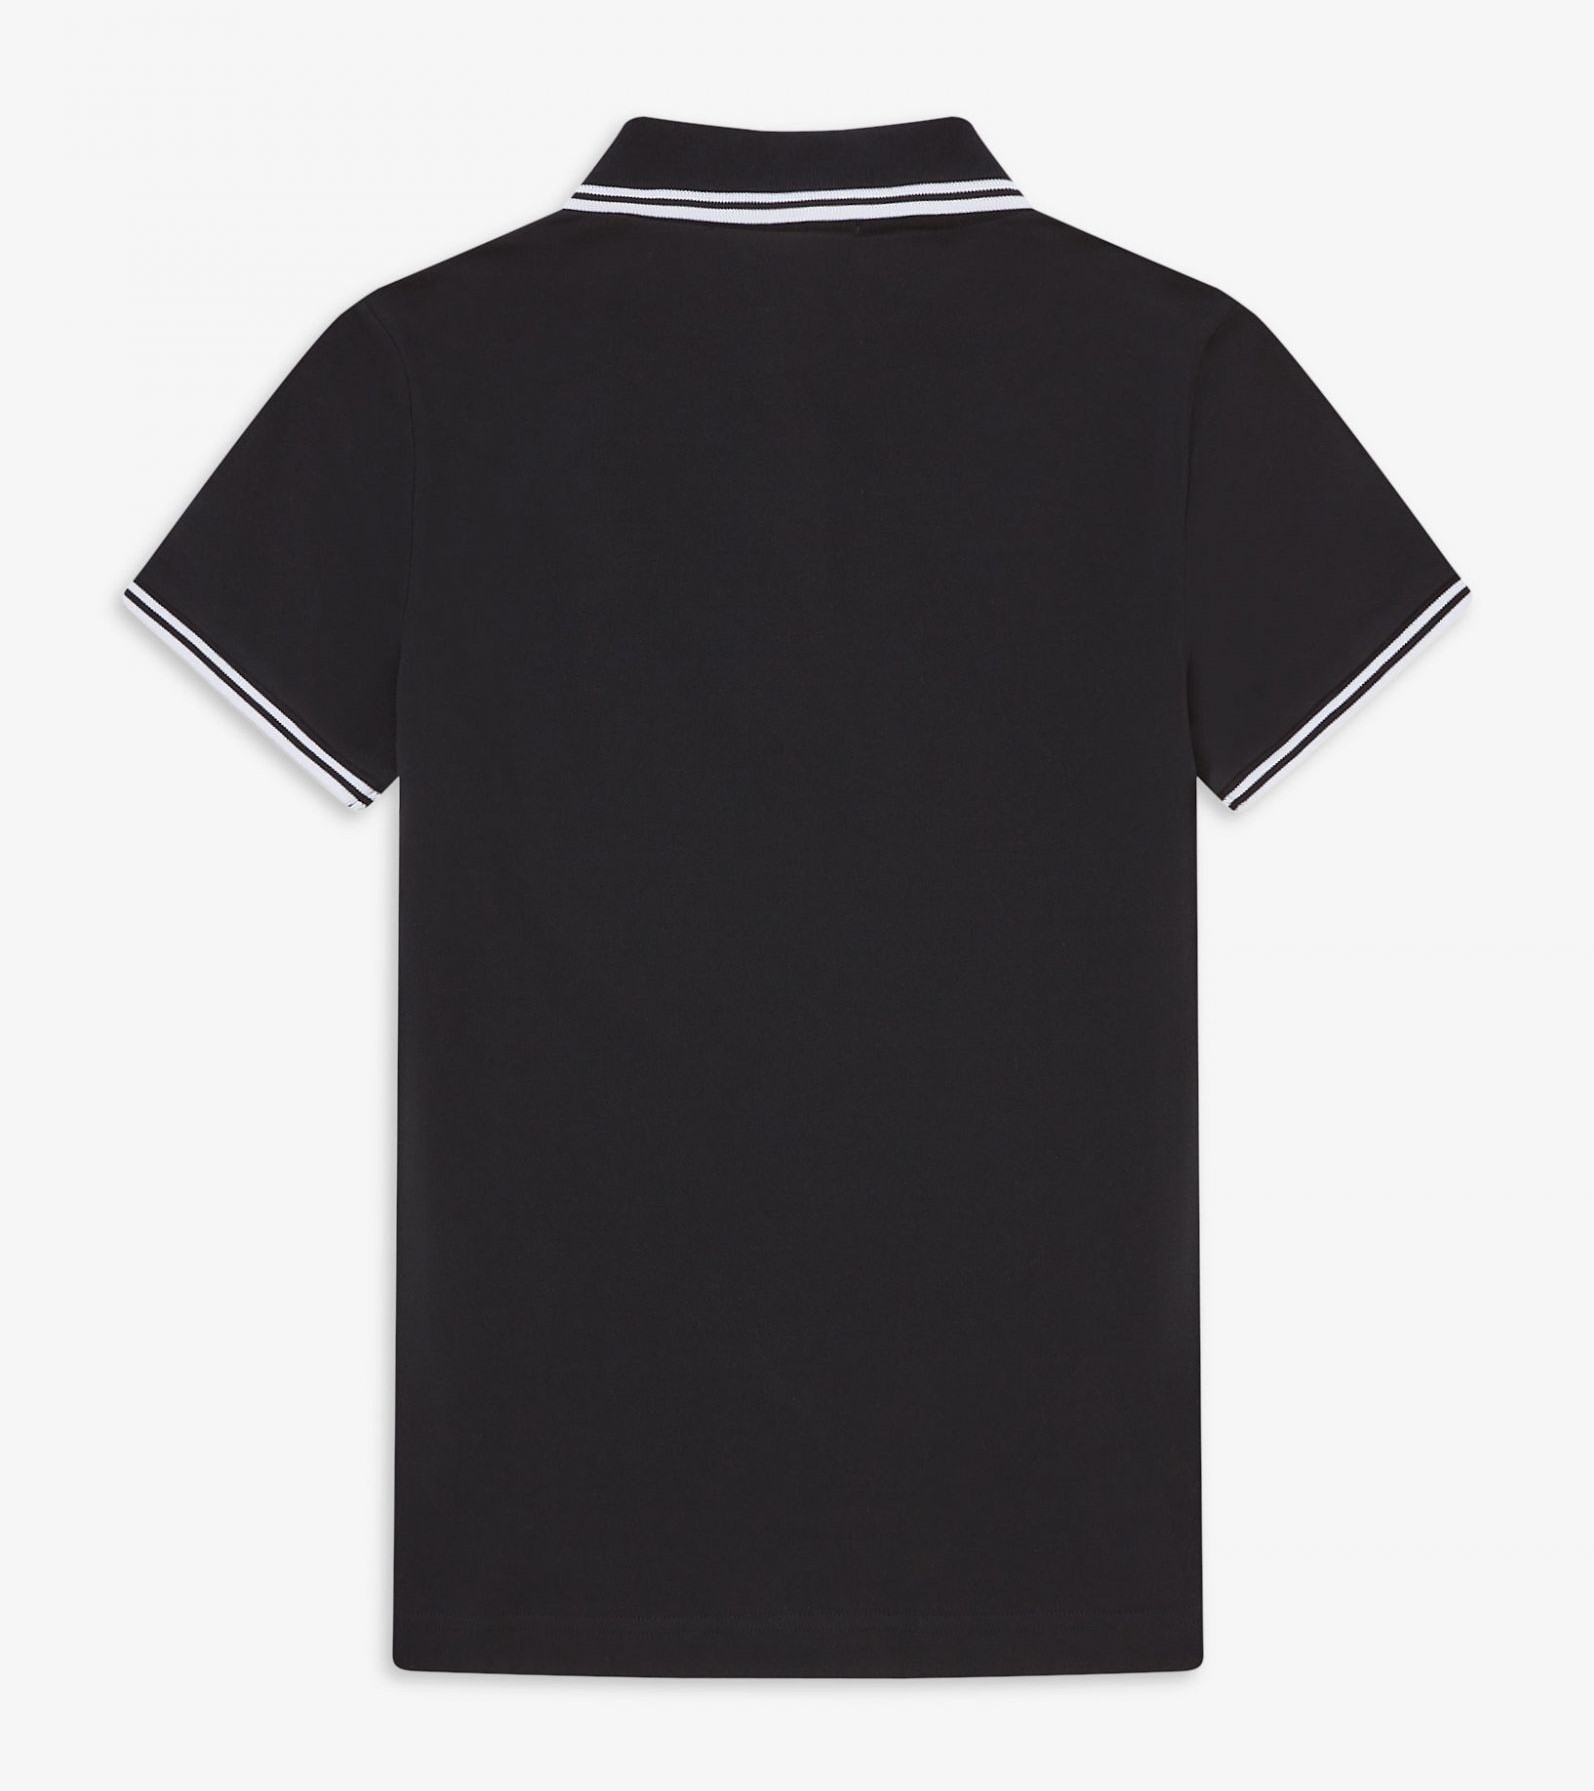 Fred Perry - W' TWIN TIPPED POLO SHIRT - Black